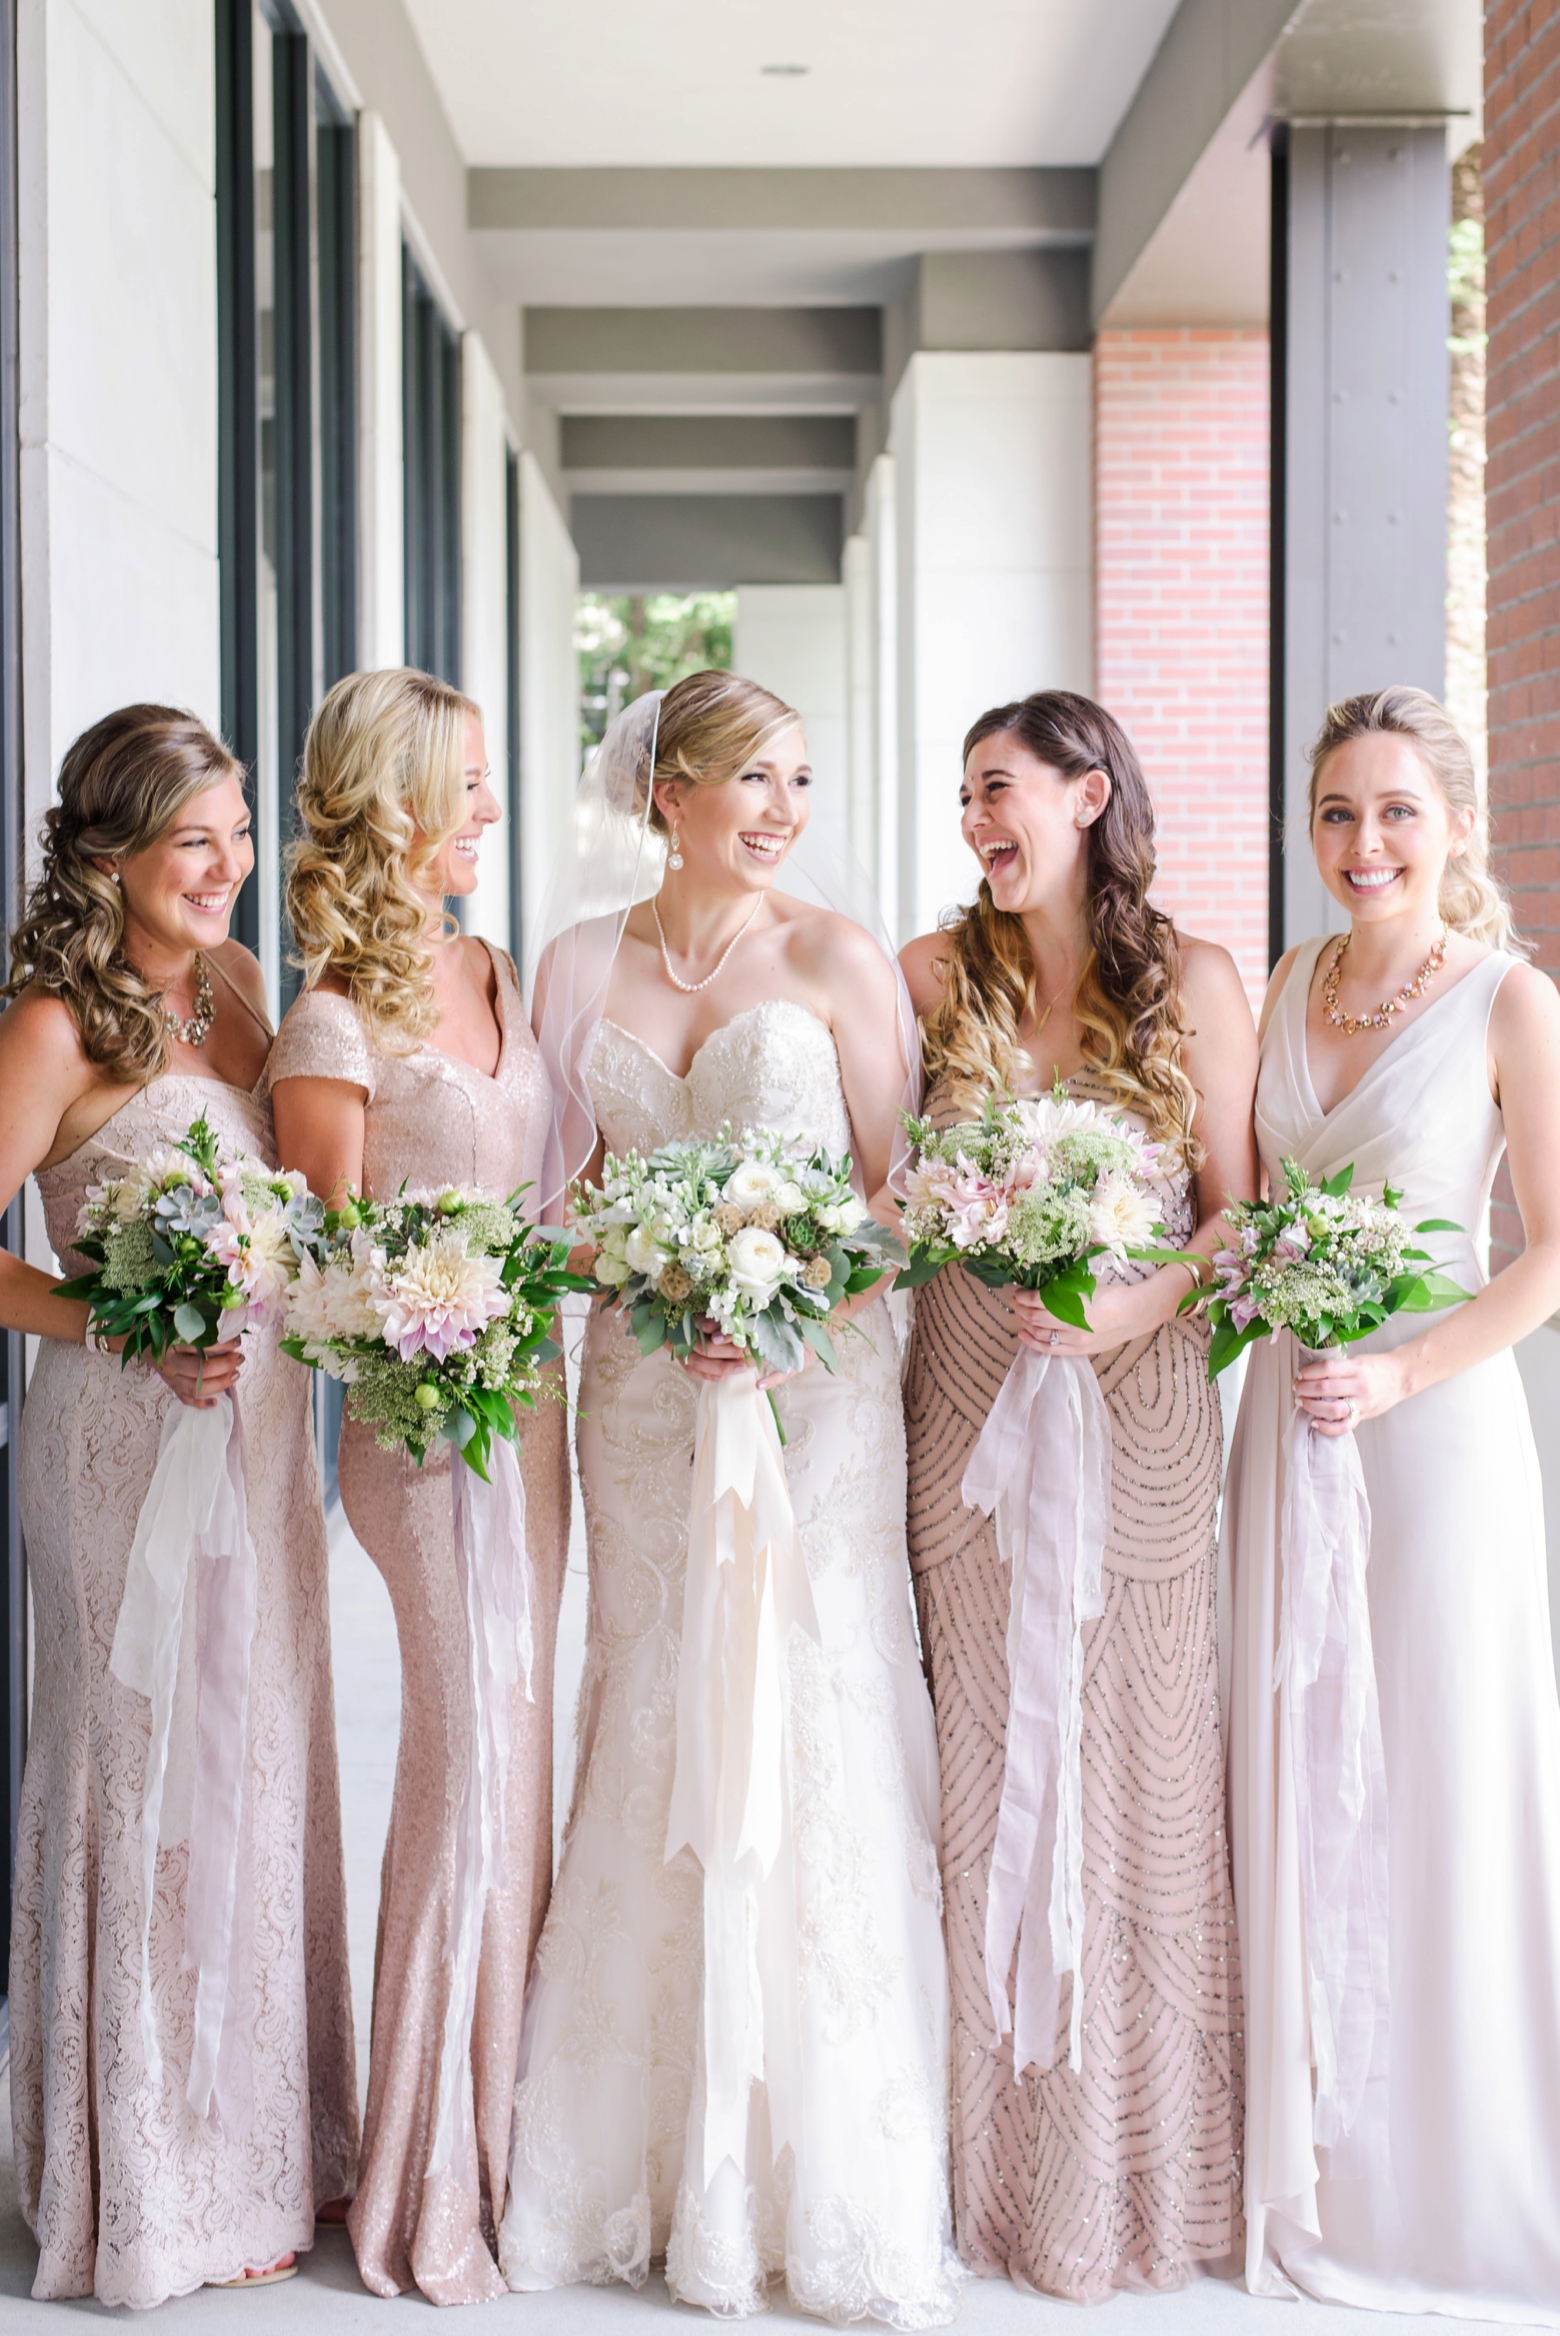 The Bride and her Bridesmaids bathed in sunshine holding their floral bouquets